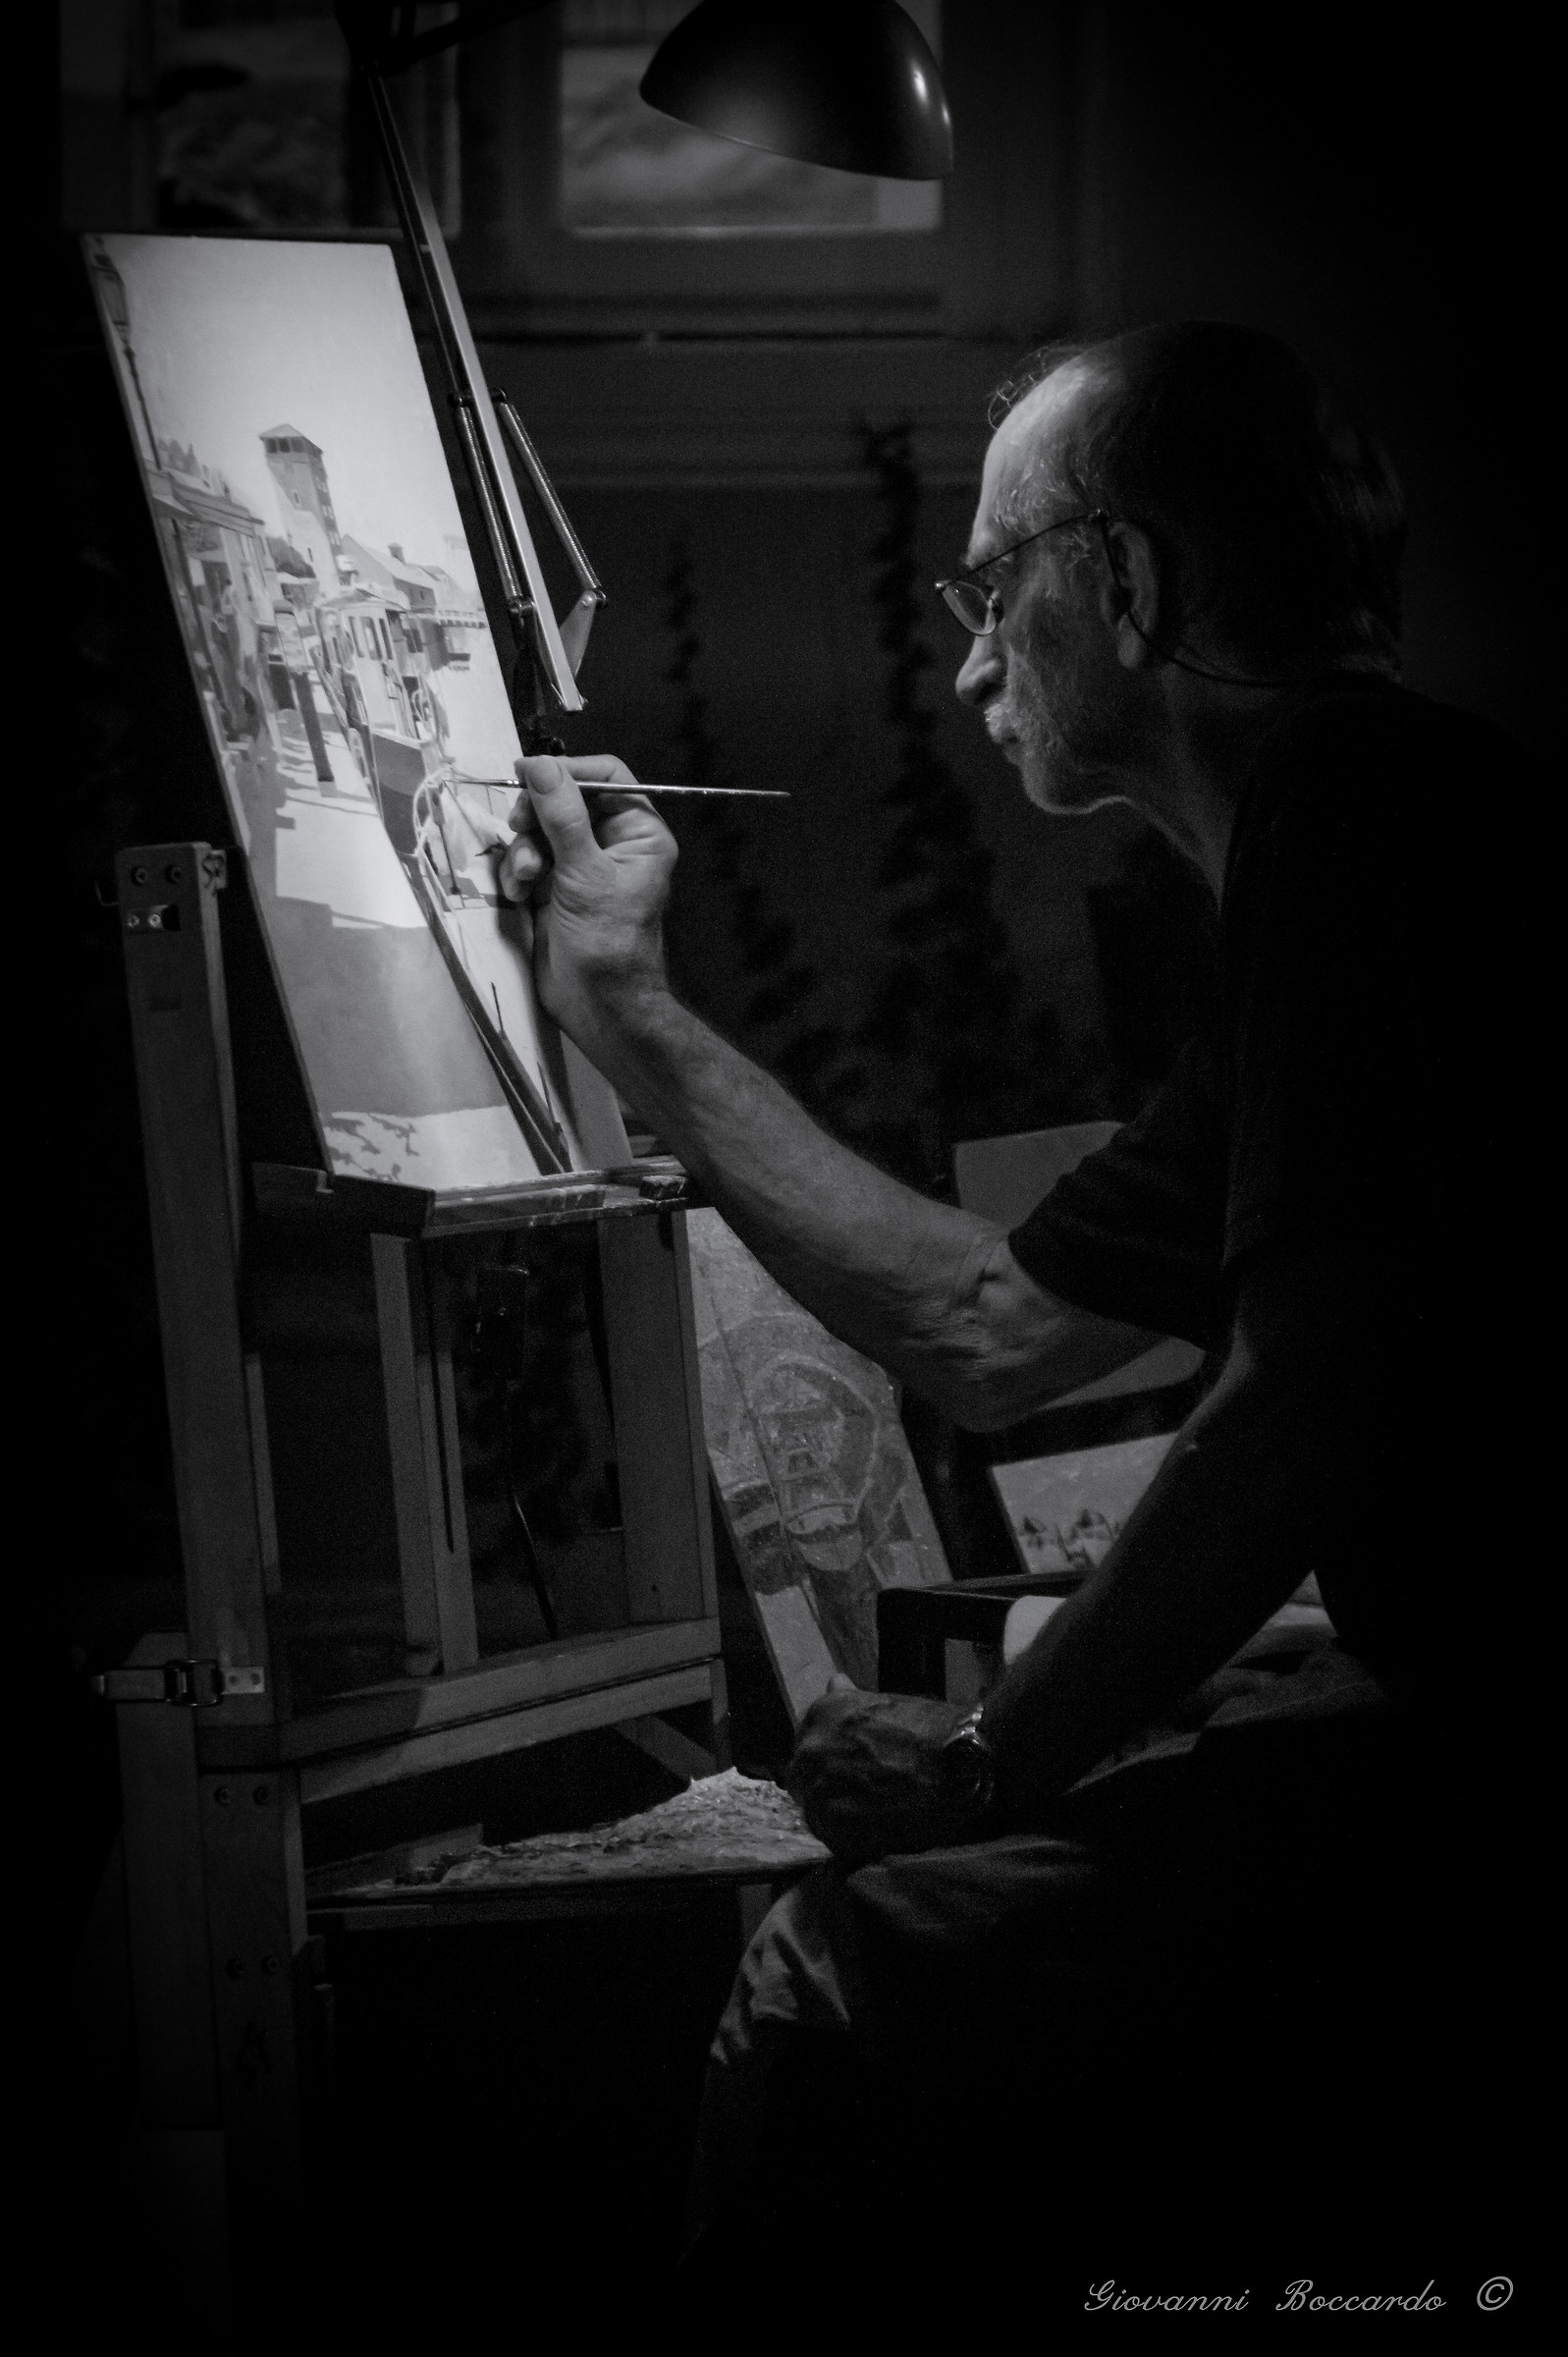 Painting in black and white ......